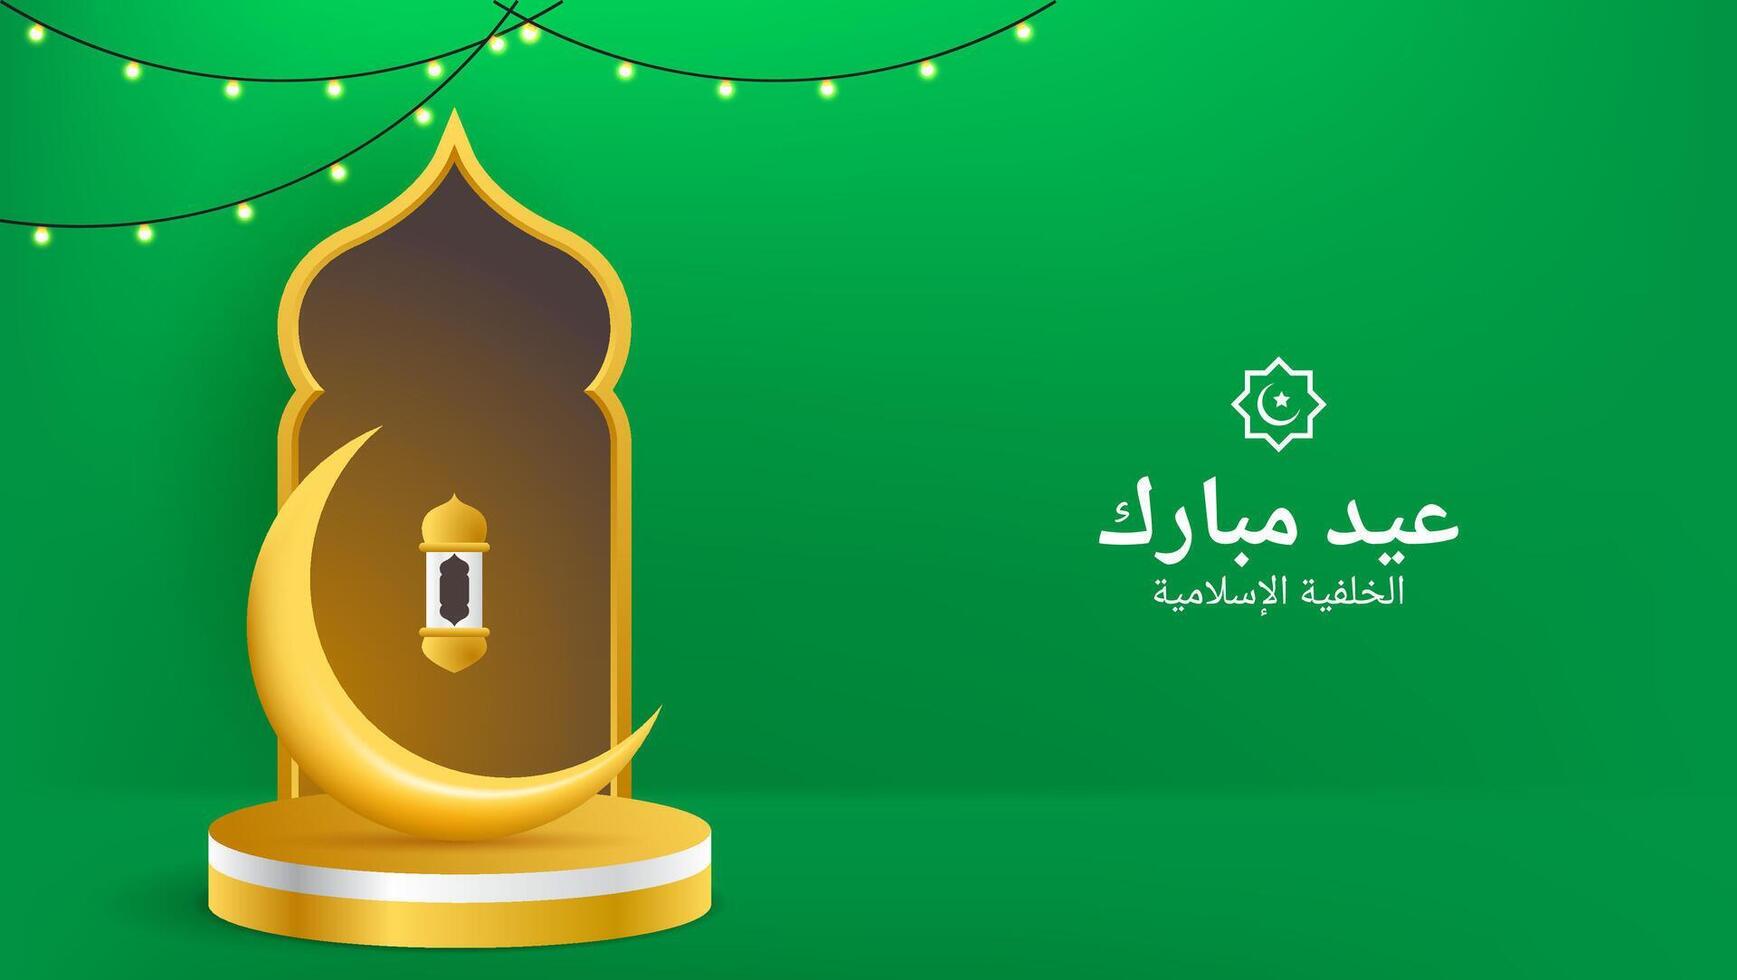 islamic background with crescent, lantern, gate and podium in gold and green color. great for celebrate of islamic holiday. vector illustration